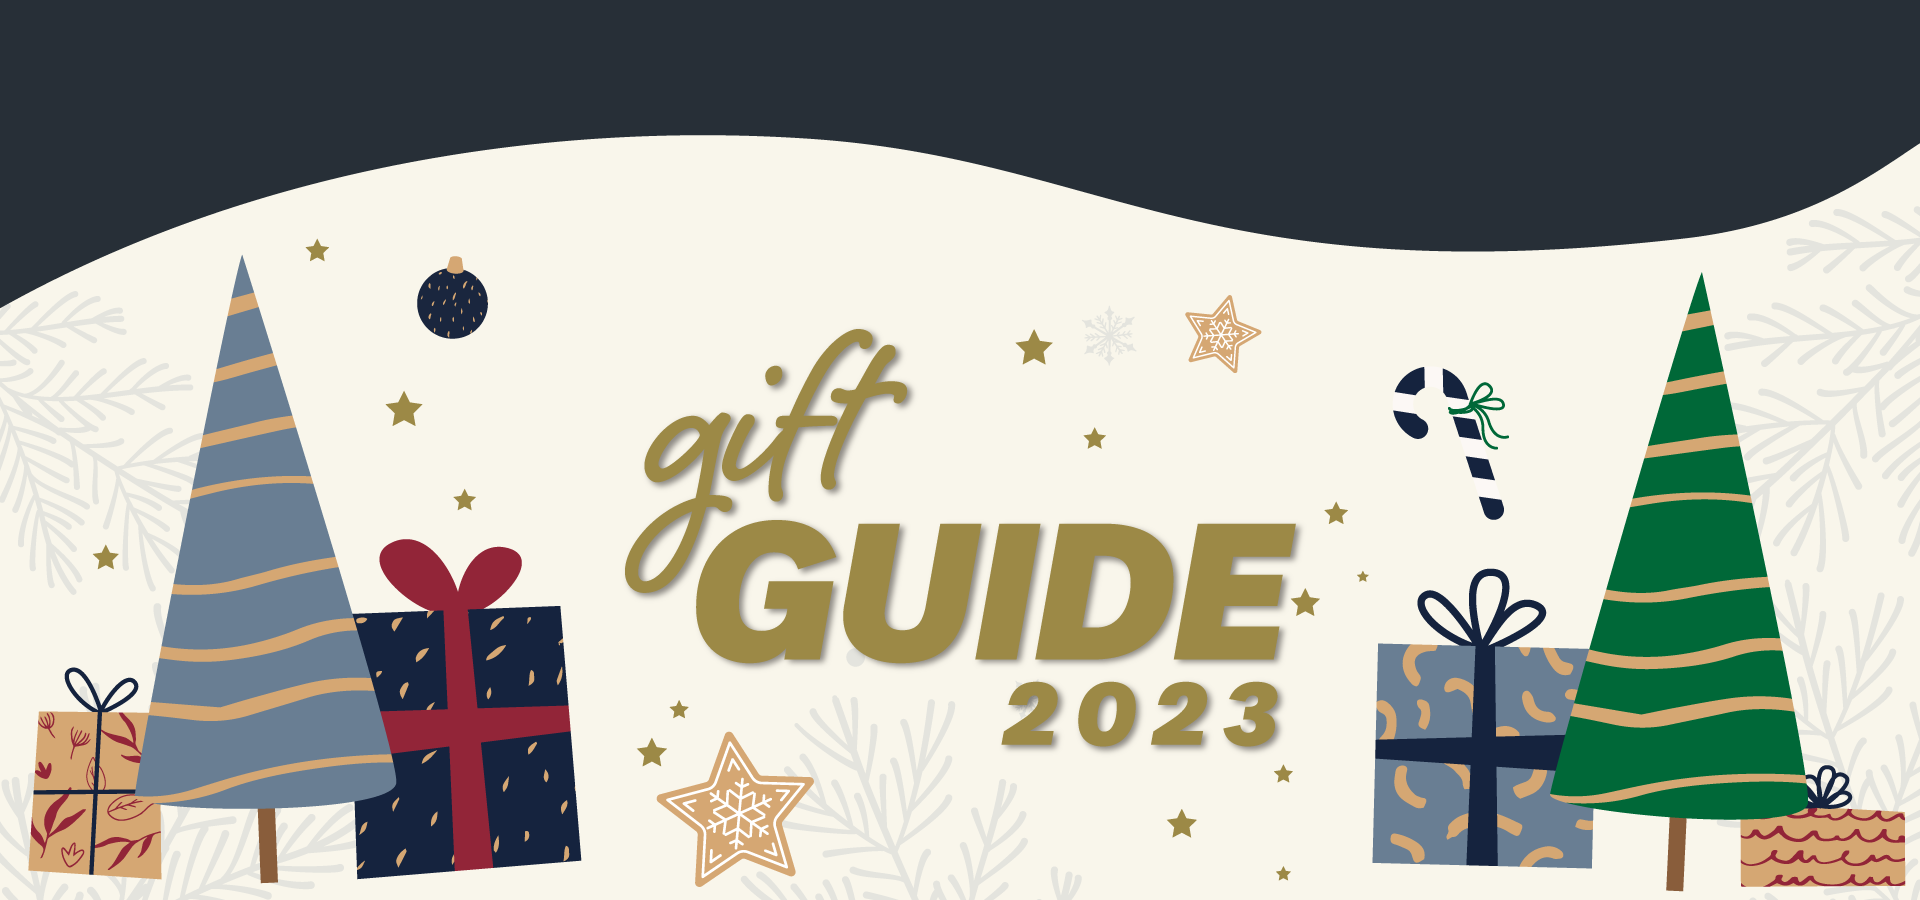 Autism Speaks 2023 Gift Guide